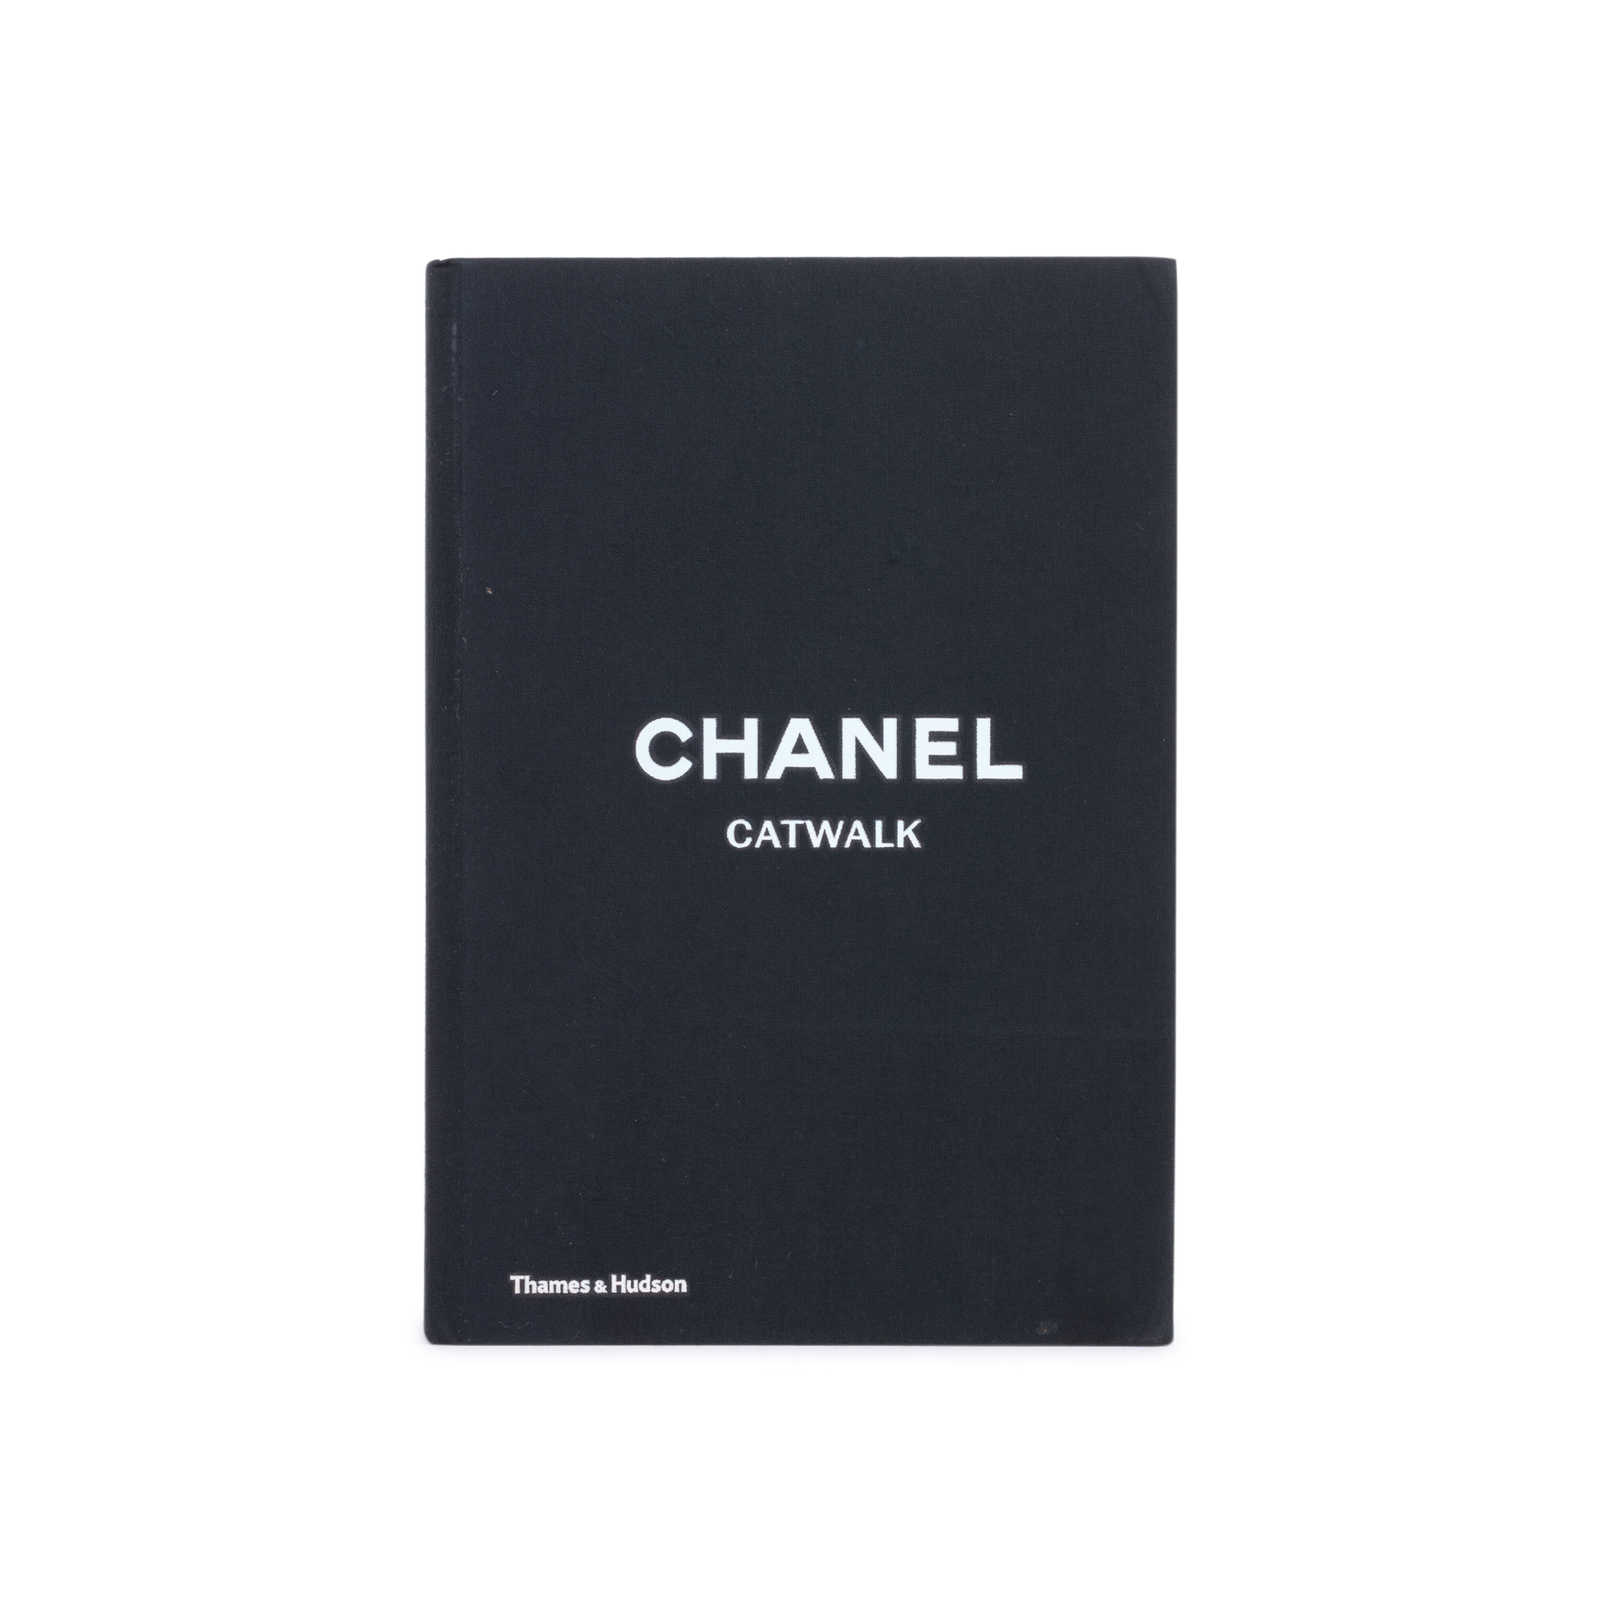 Chanel Catwalk Book - the complete karl lagerfeld collections